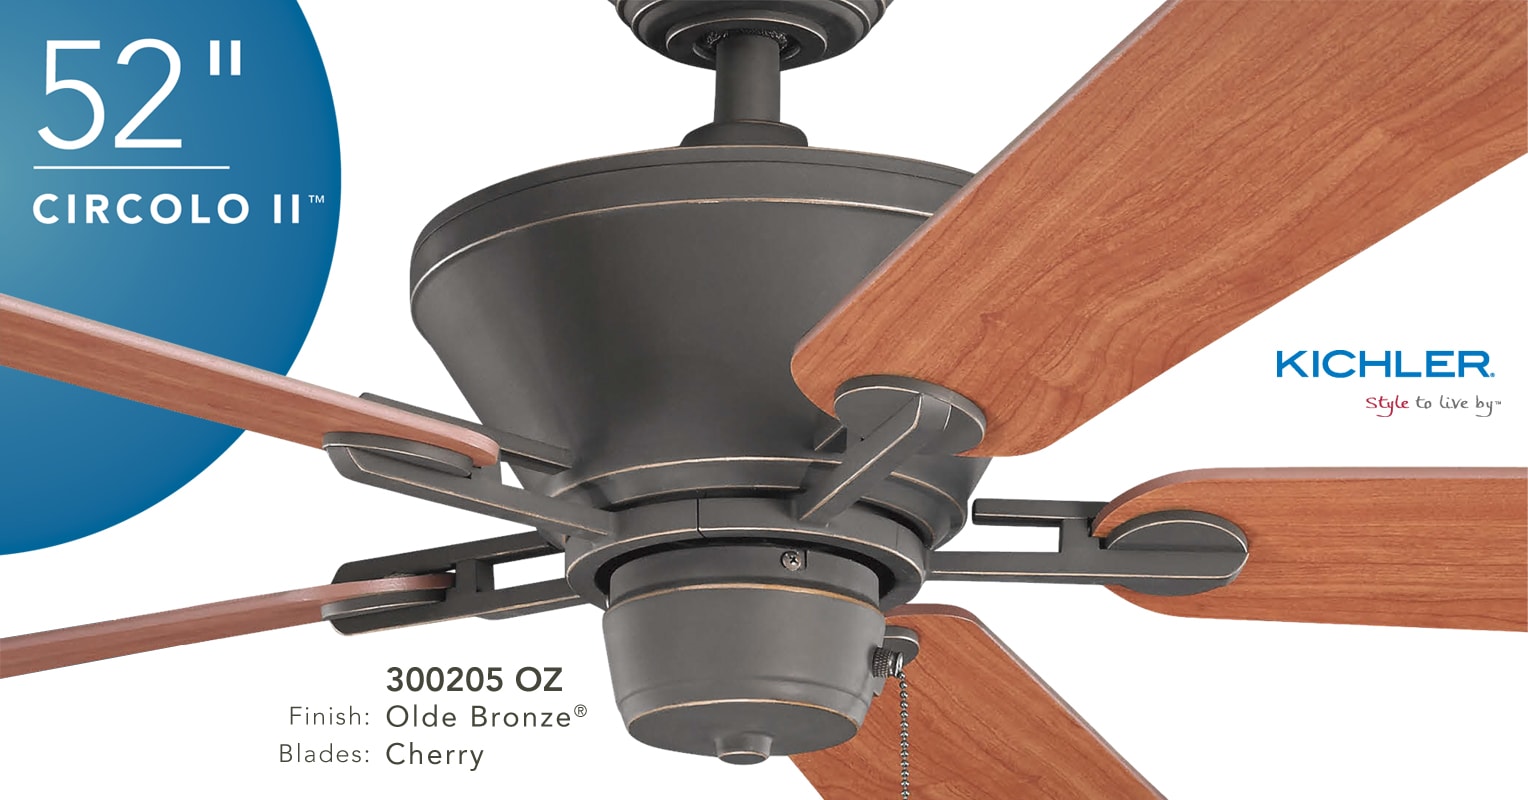 Kichler 300205oz Olde Bronze Circolo 52 Indoor Ceiling Fan With 5 Blades Includes 4 And 12 Downrods Lightingdirect Com